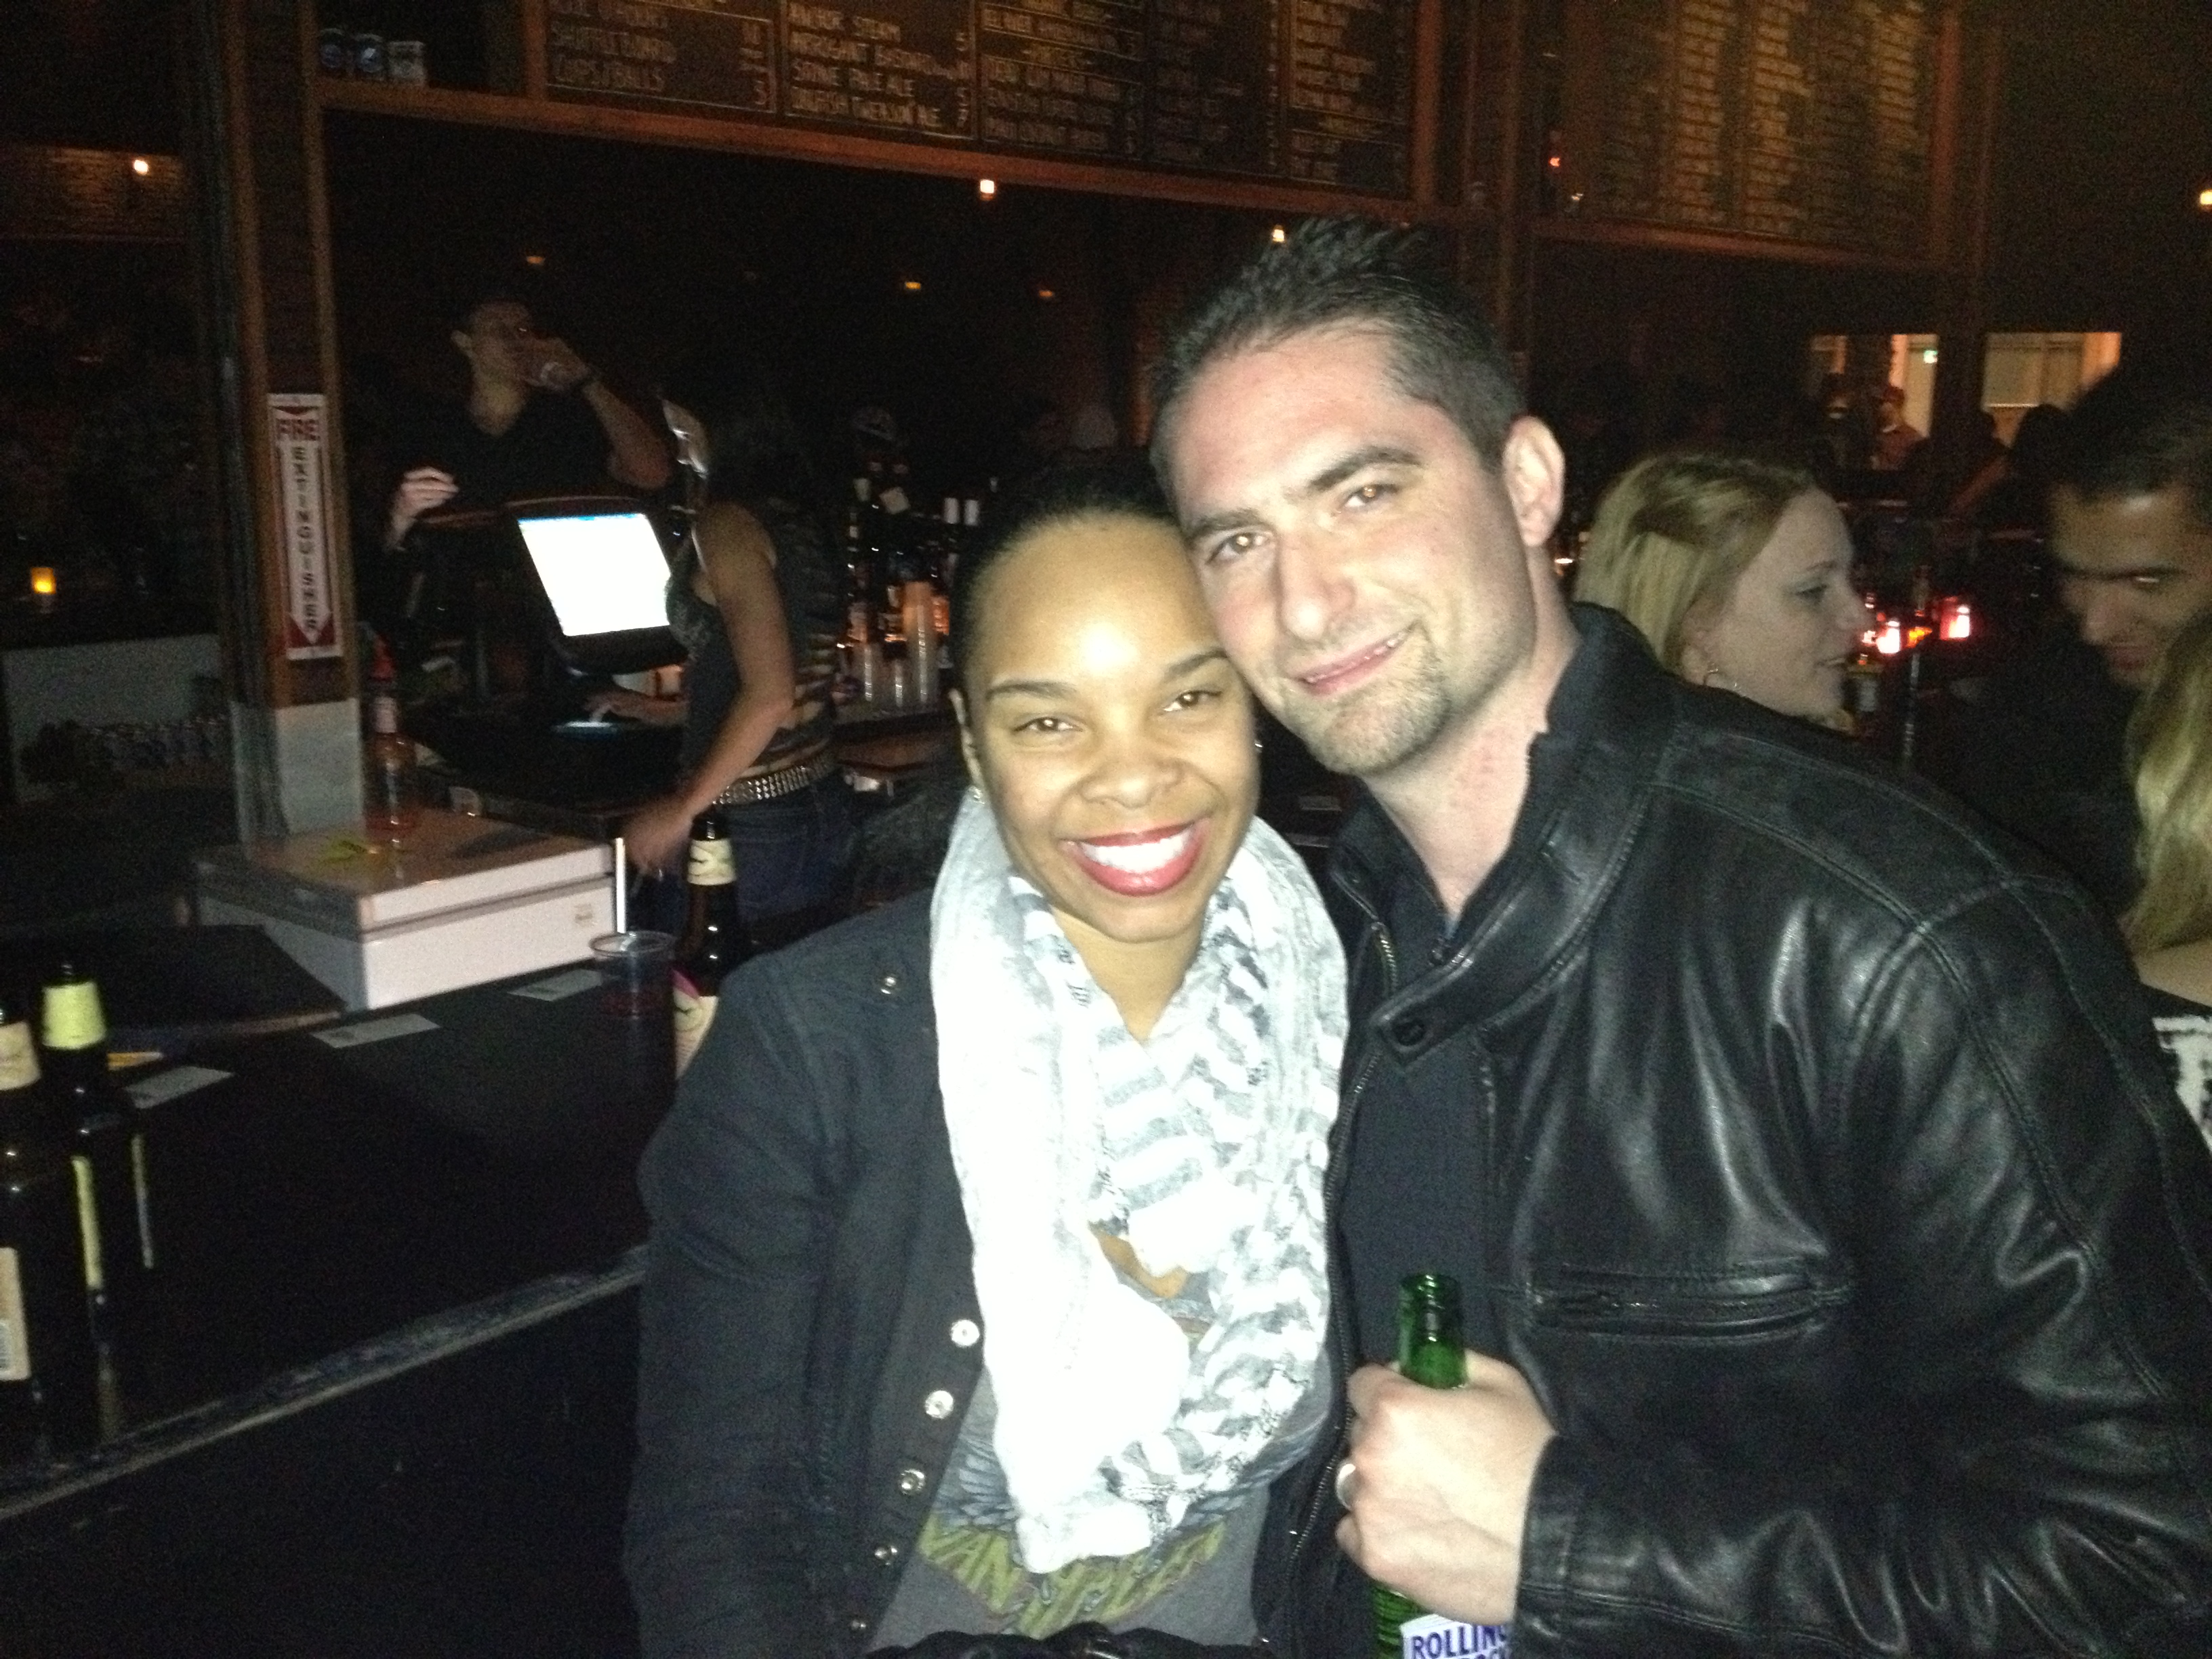 Chillin' with Cherie Johnson from Punky Brewster and Family Matters.